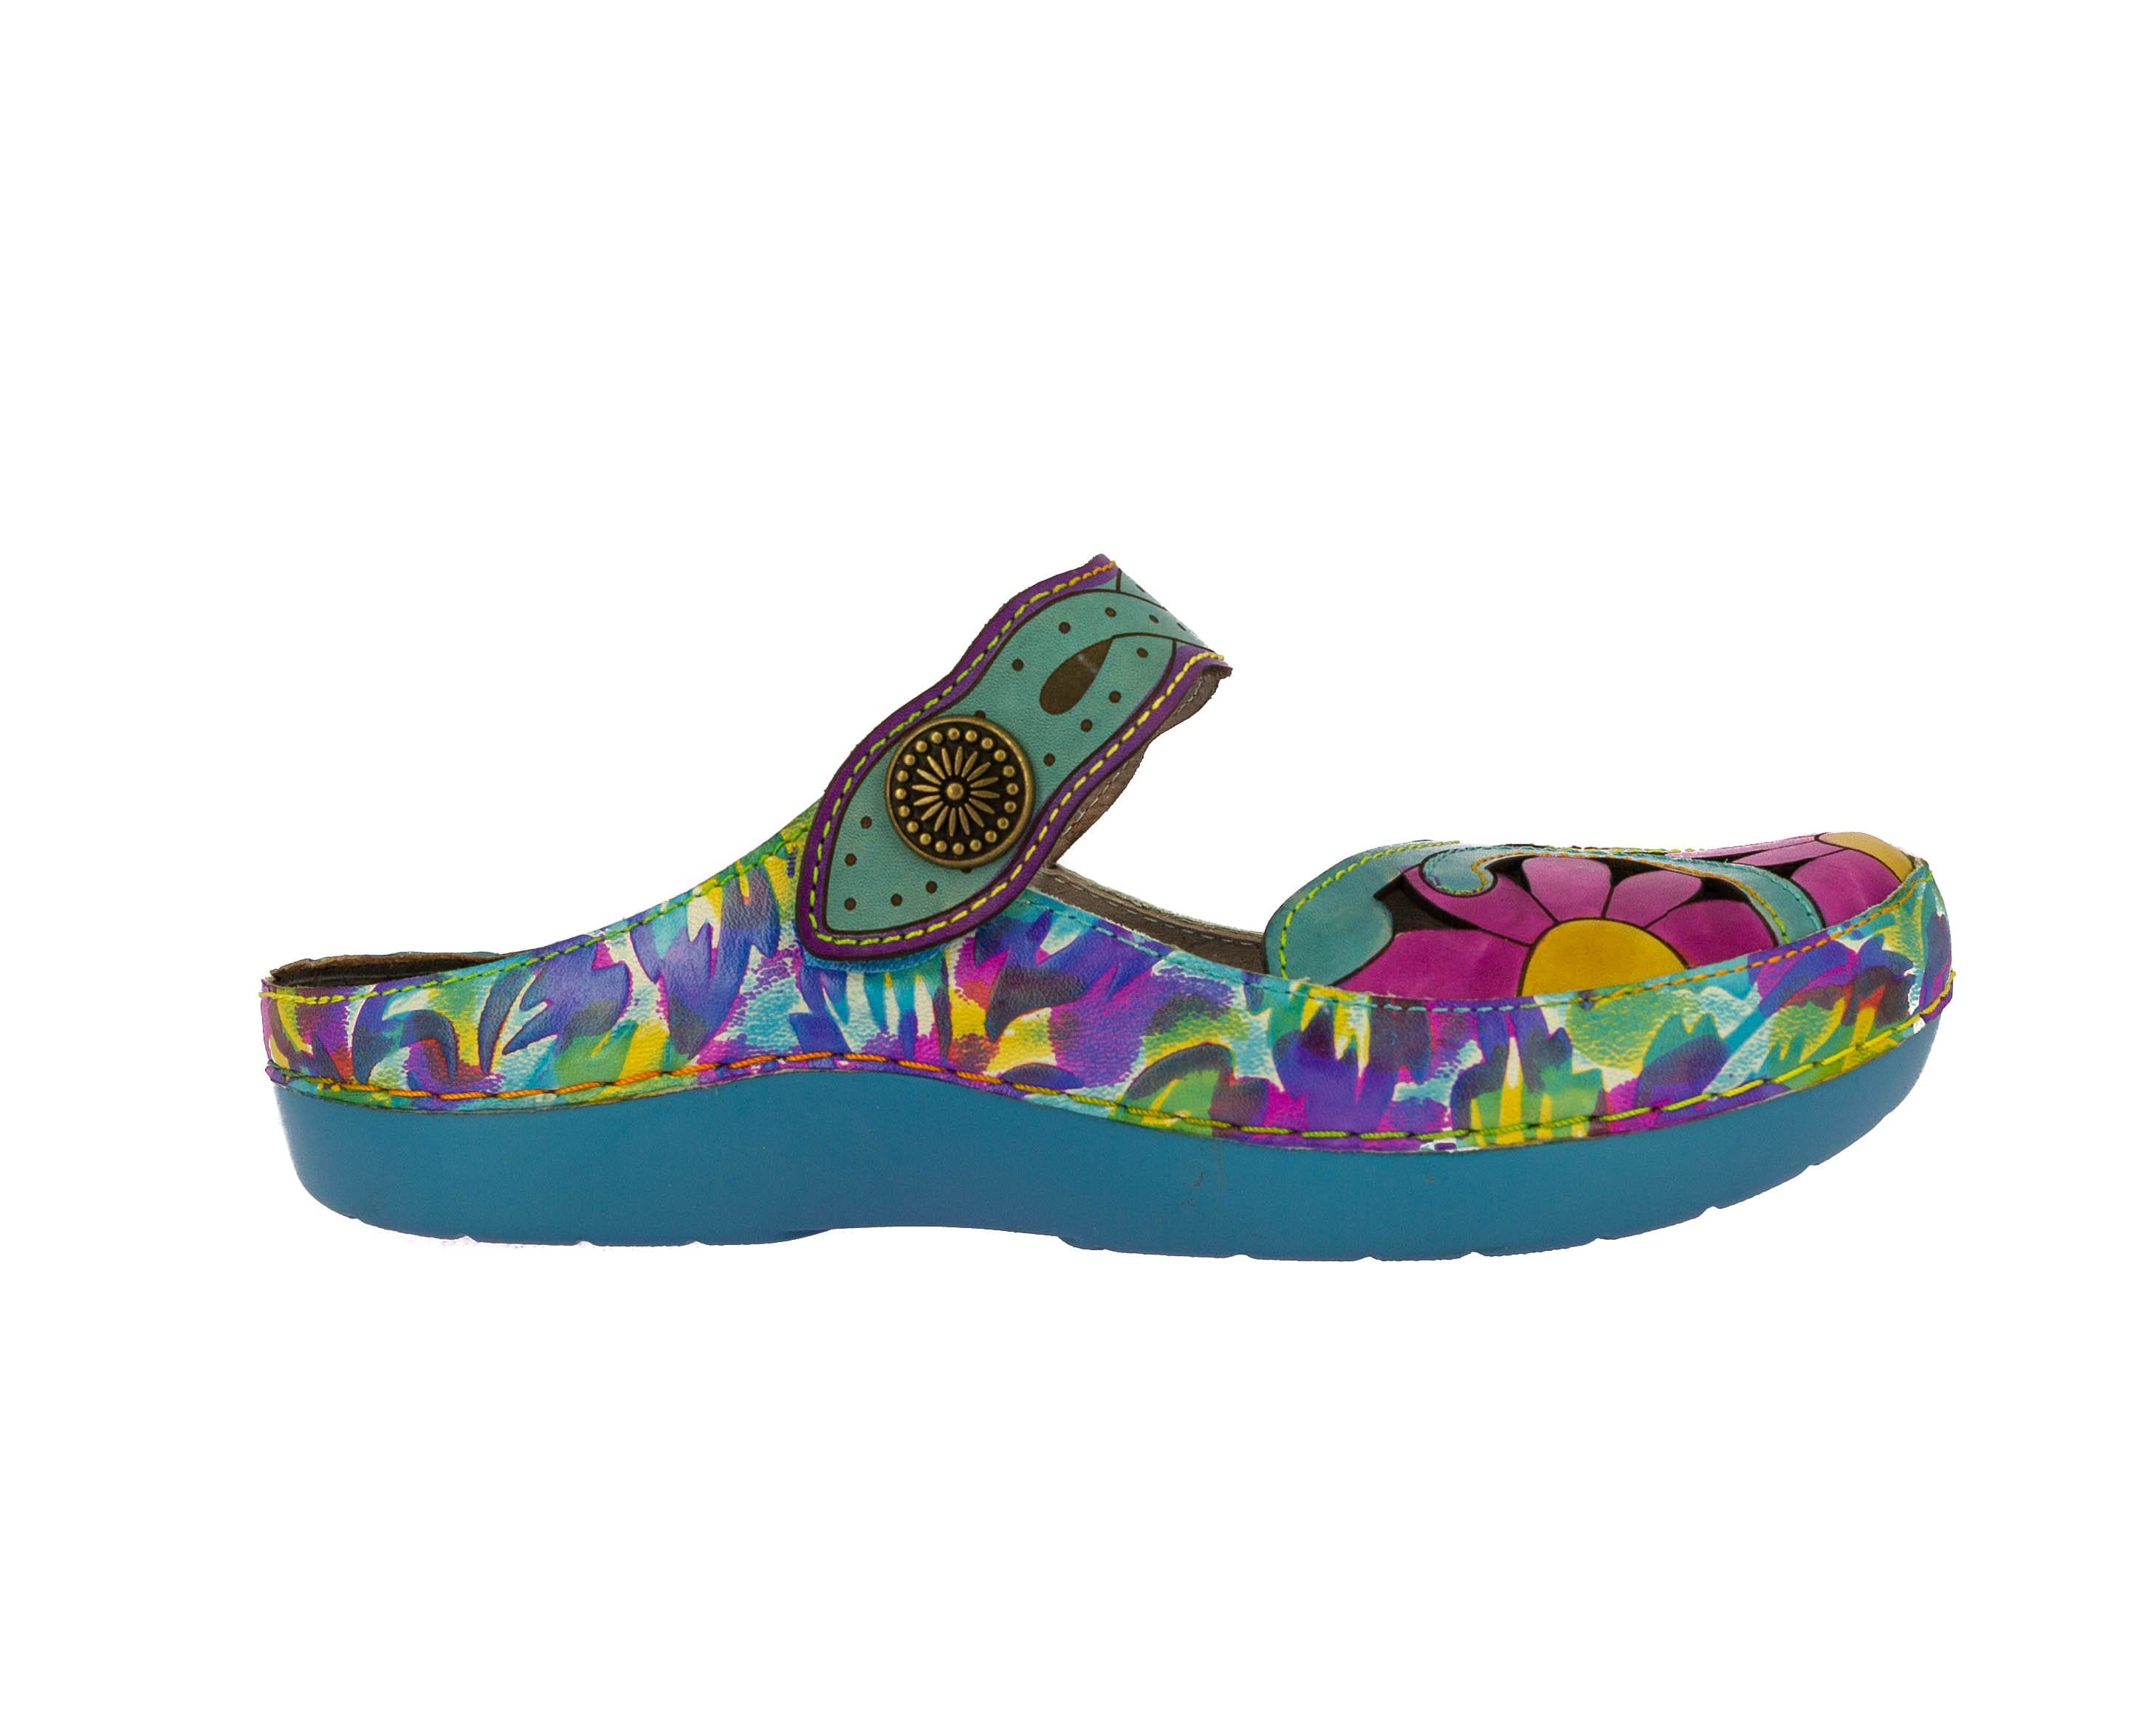 Chaussures BICLLYO 22 - 35 / TURQUOISE - Mulle